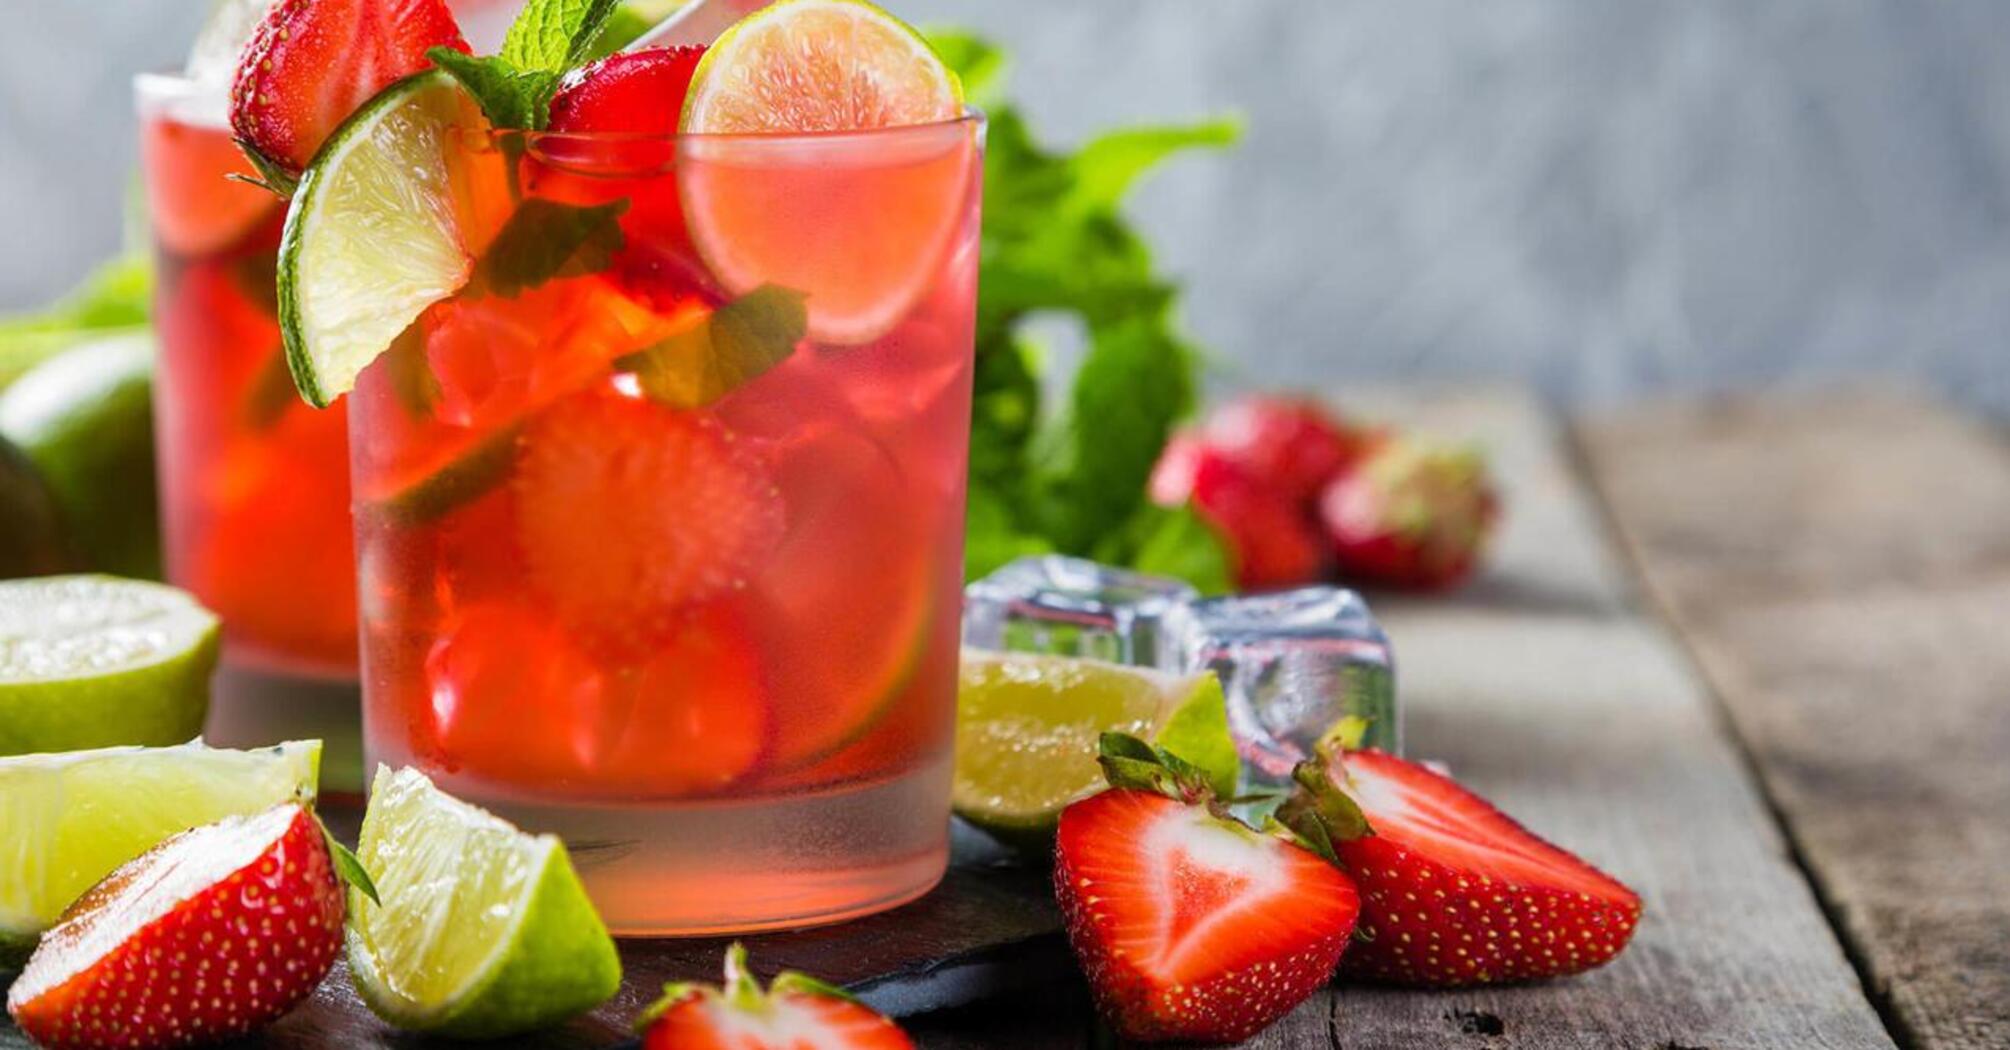 How to make strawberry mojito for the winter: better than store-bought juices and sodas